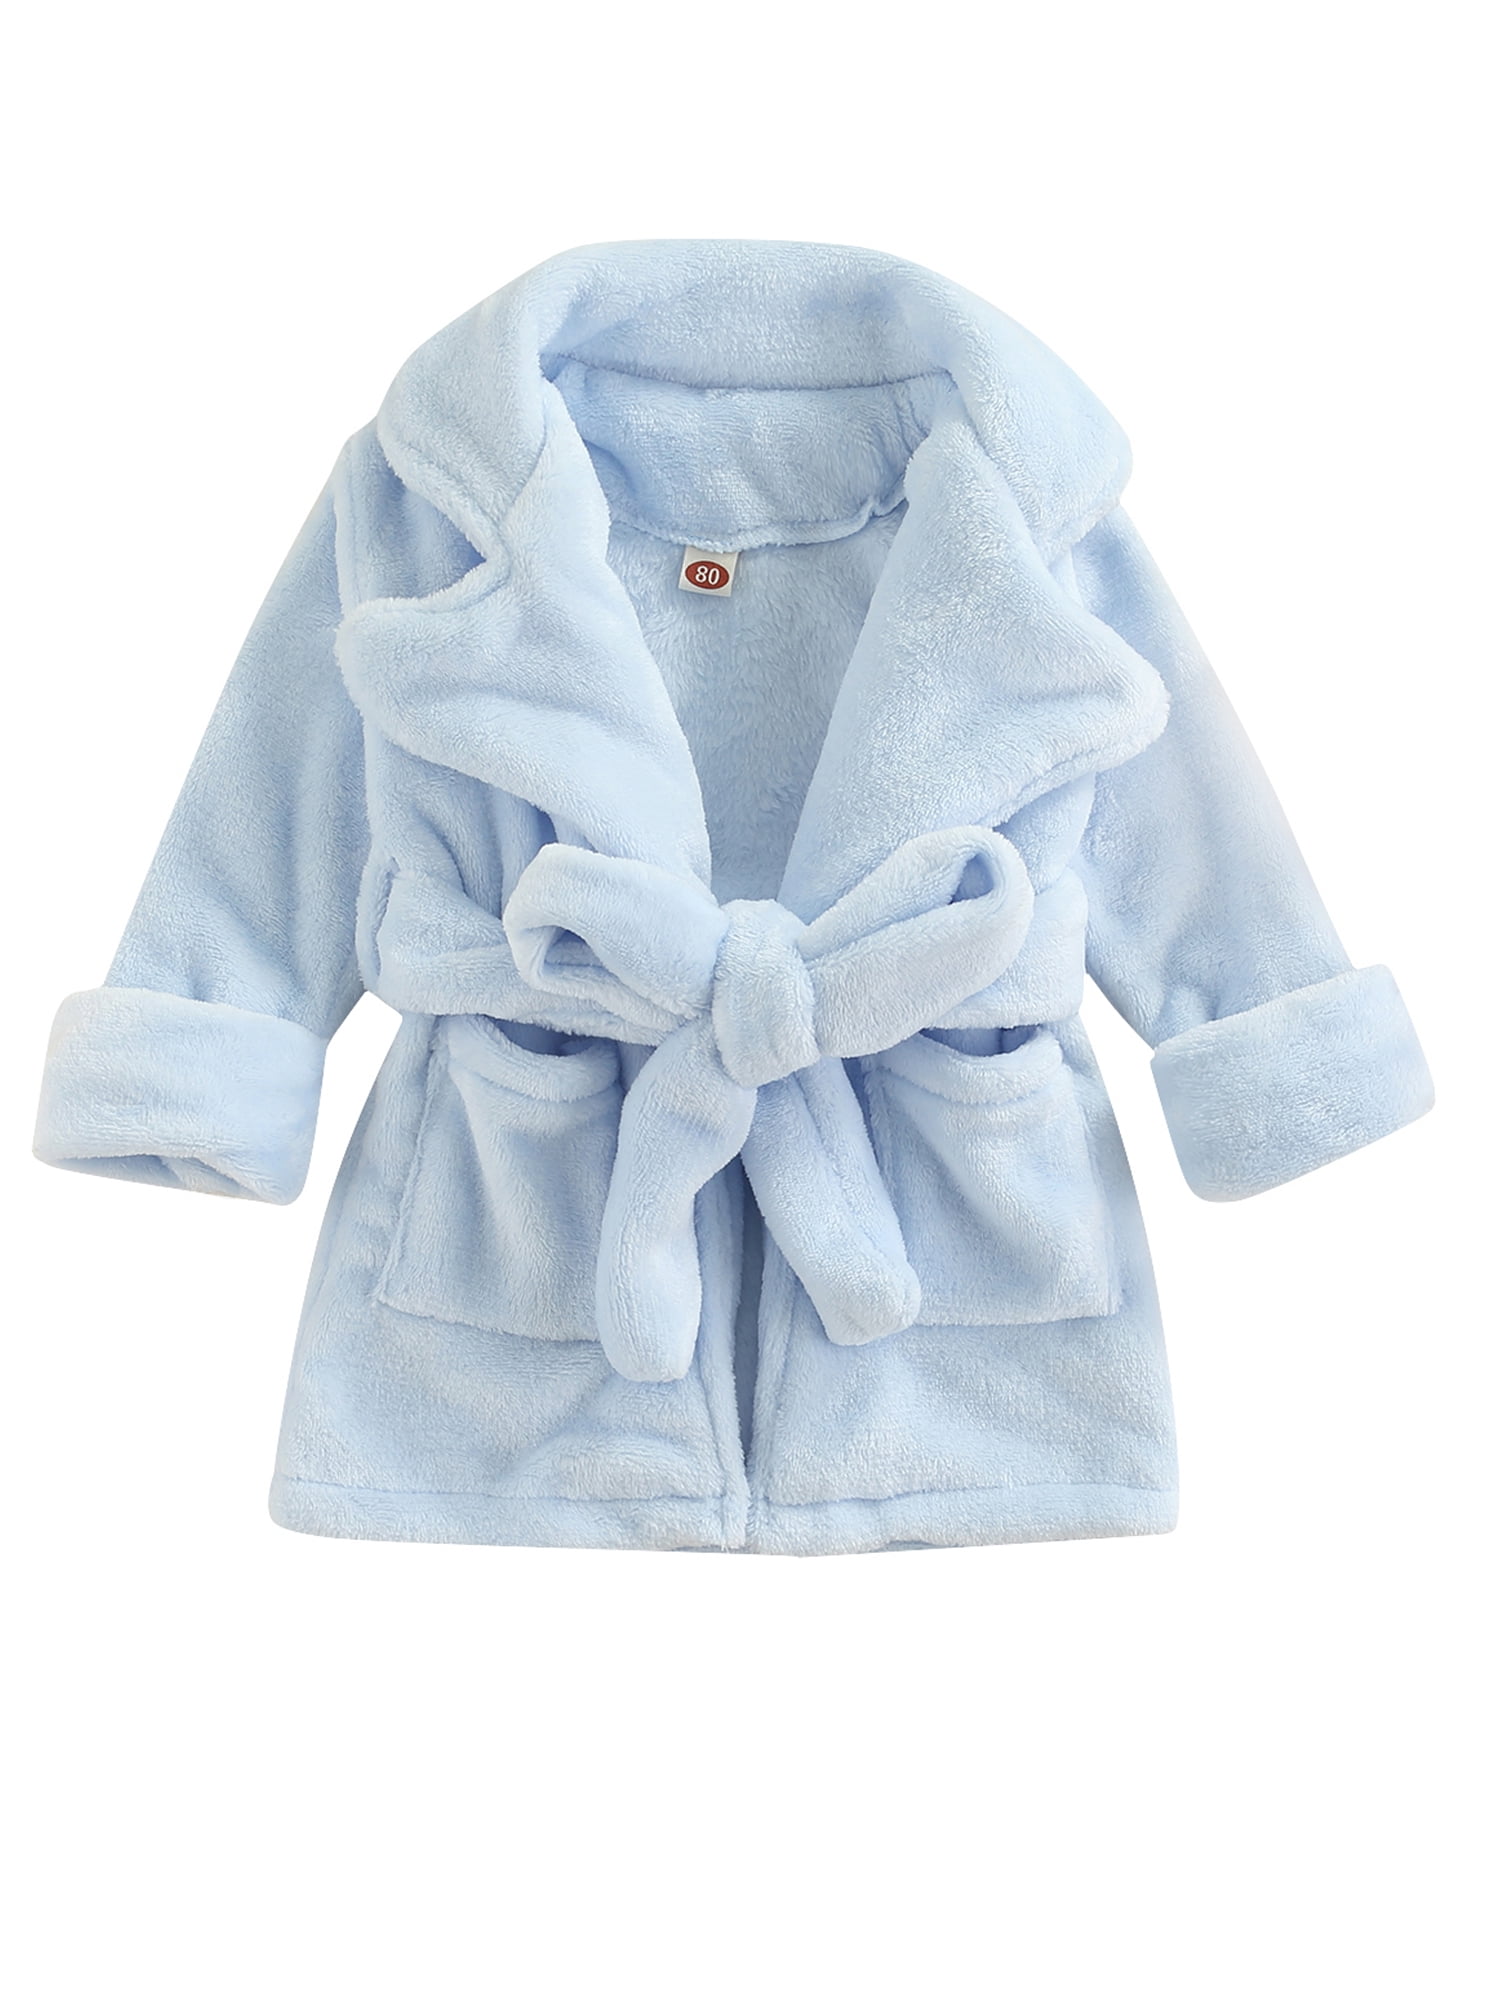 Infant Toddler Baby Girl Flannel Soft Bathrobes Hoodie Kimono Robe Clothes with Belt 